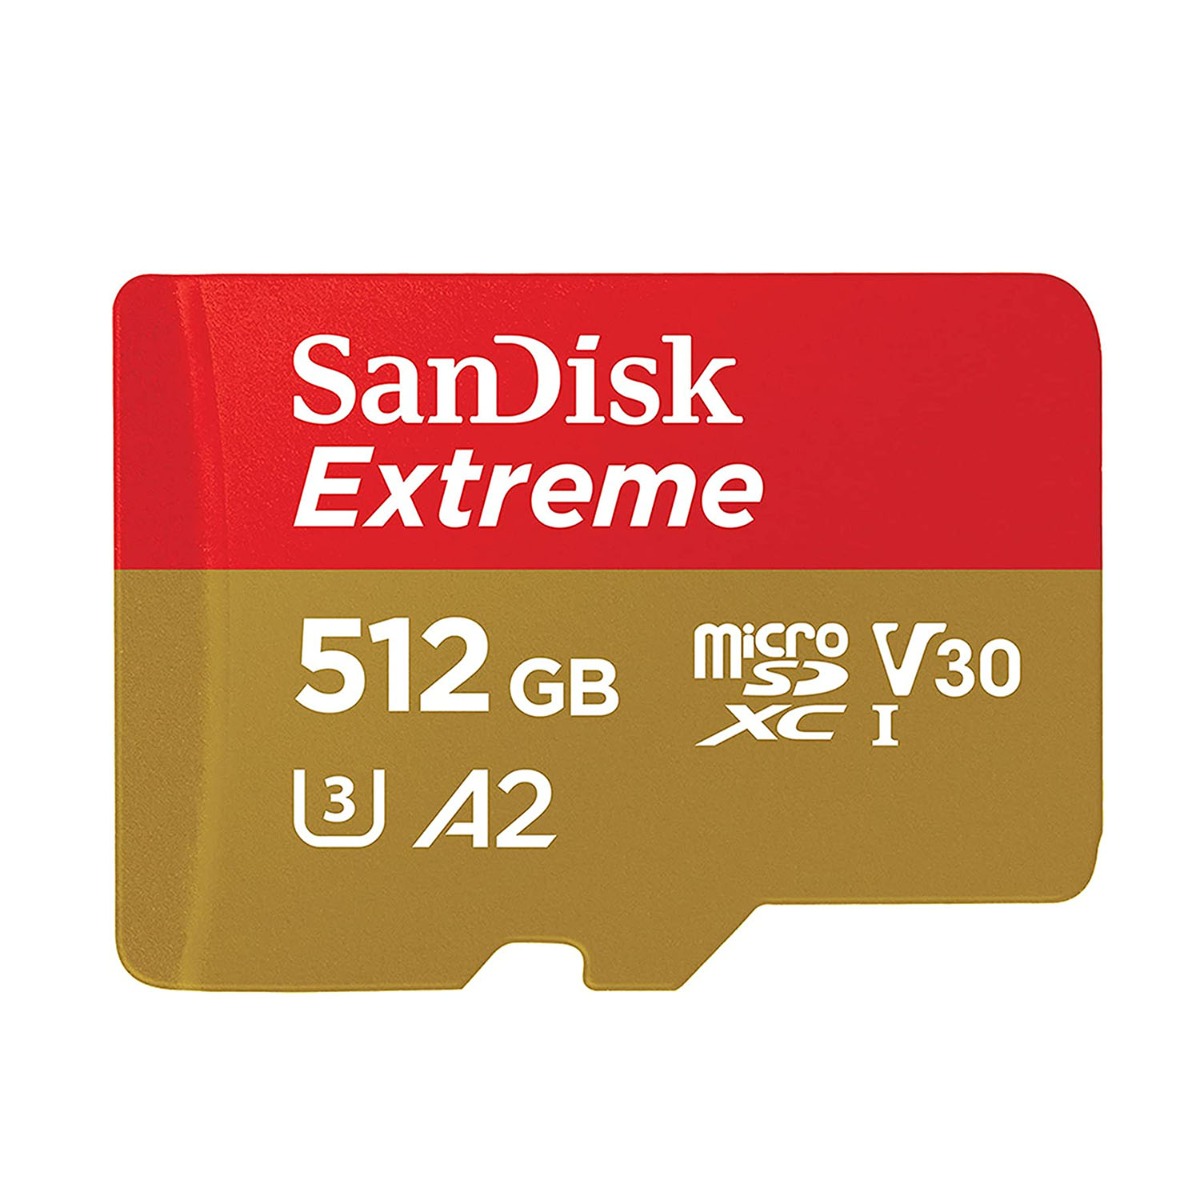 SanDisk 512GB Extreme microSDXC Card + SD Adapter Up to 190MB/s UHS-I, Class 10, U3, V30